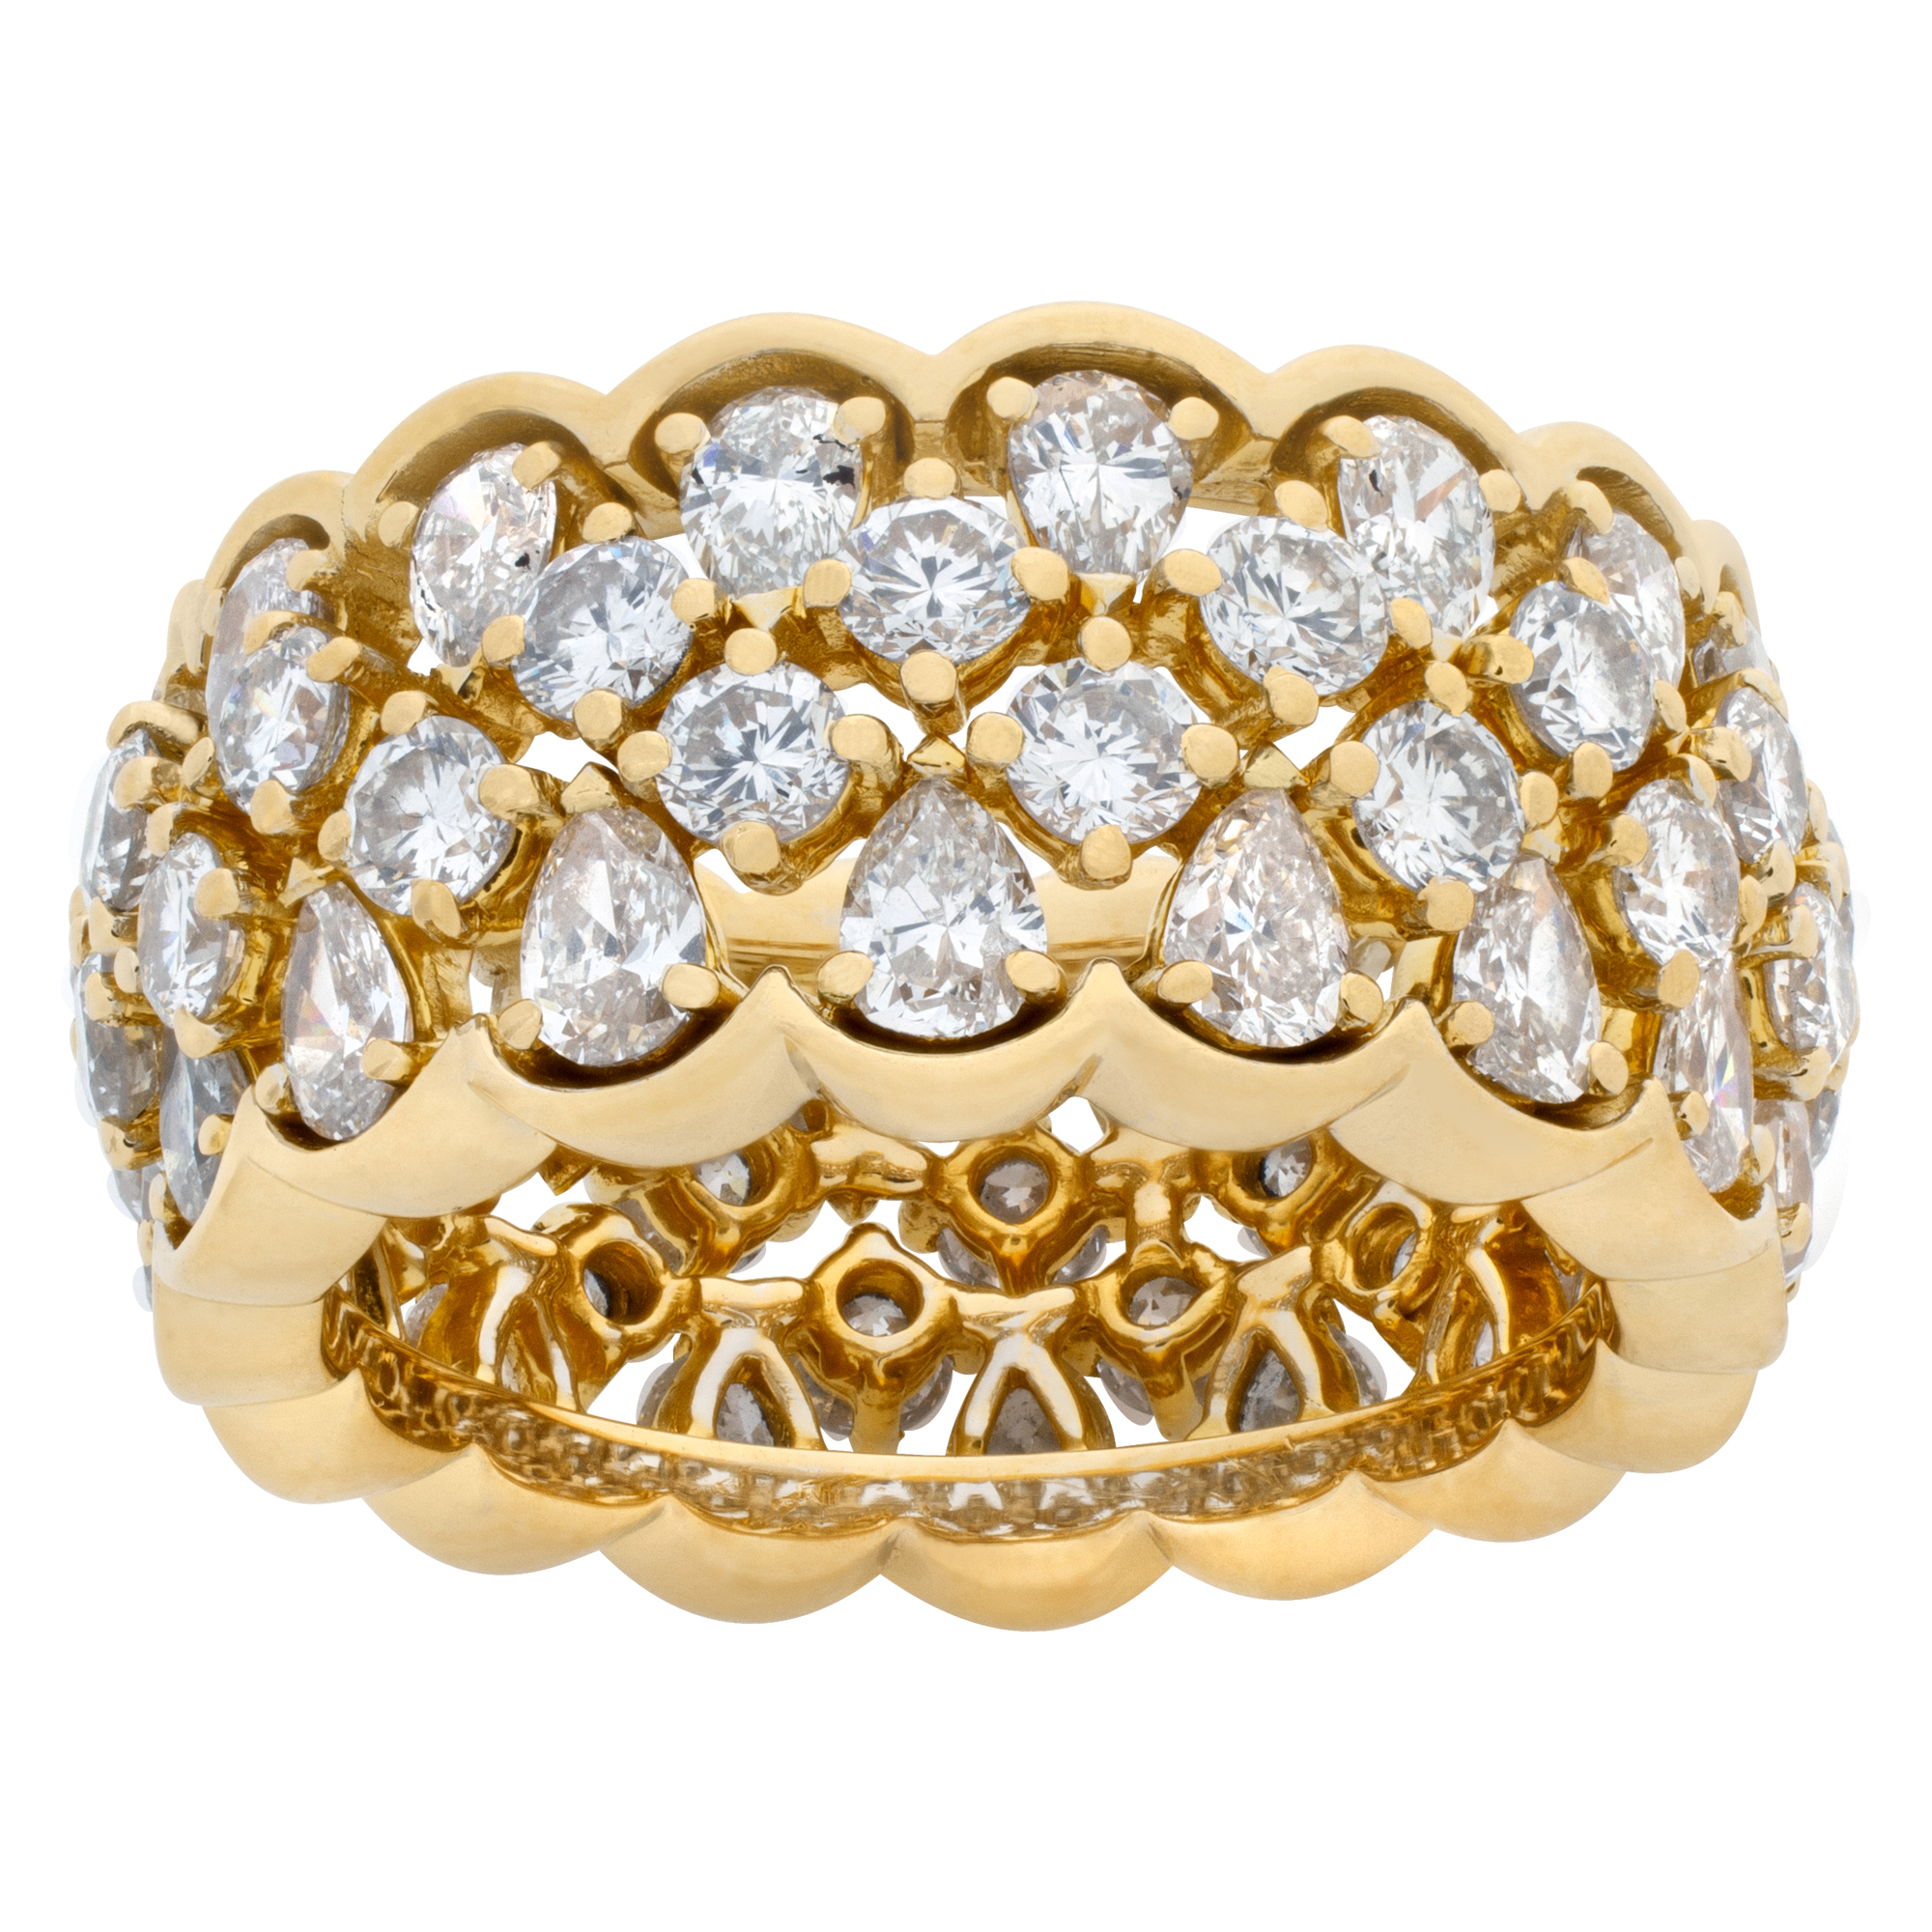 Wide "Eternity" band with approximately 5.00 carats full cut round brilliant & pear shape diamonds, set in 18K yellow gold